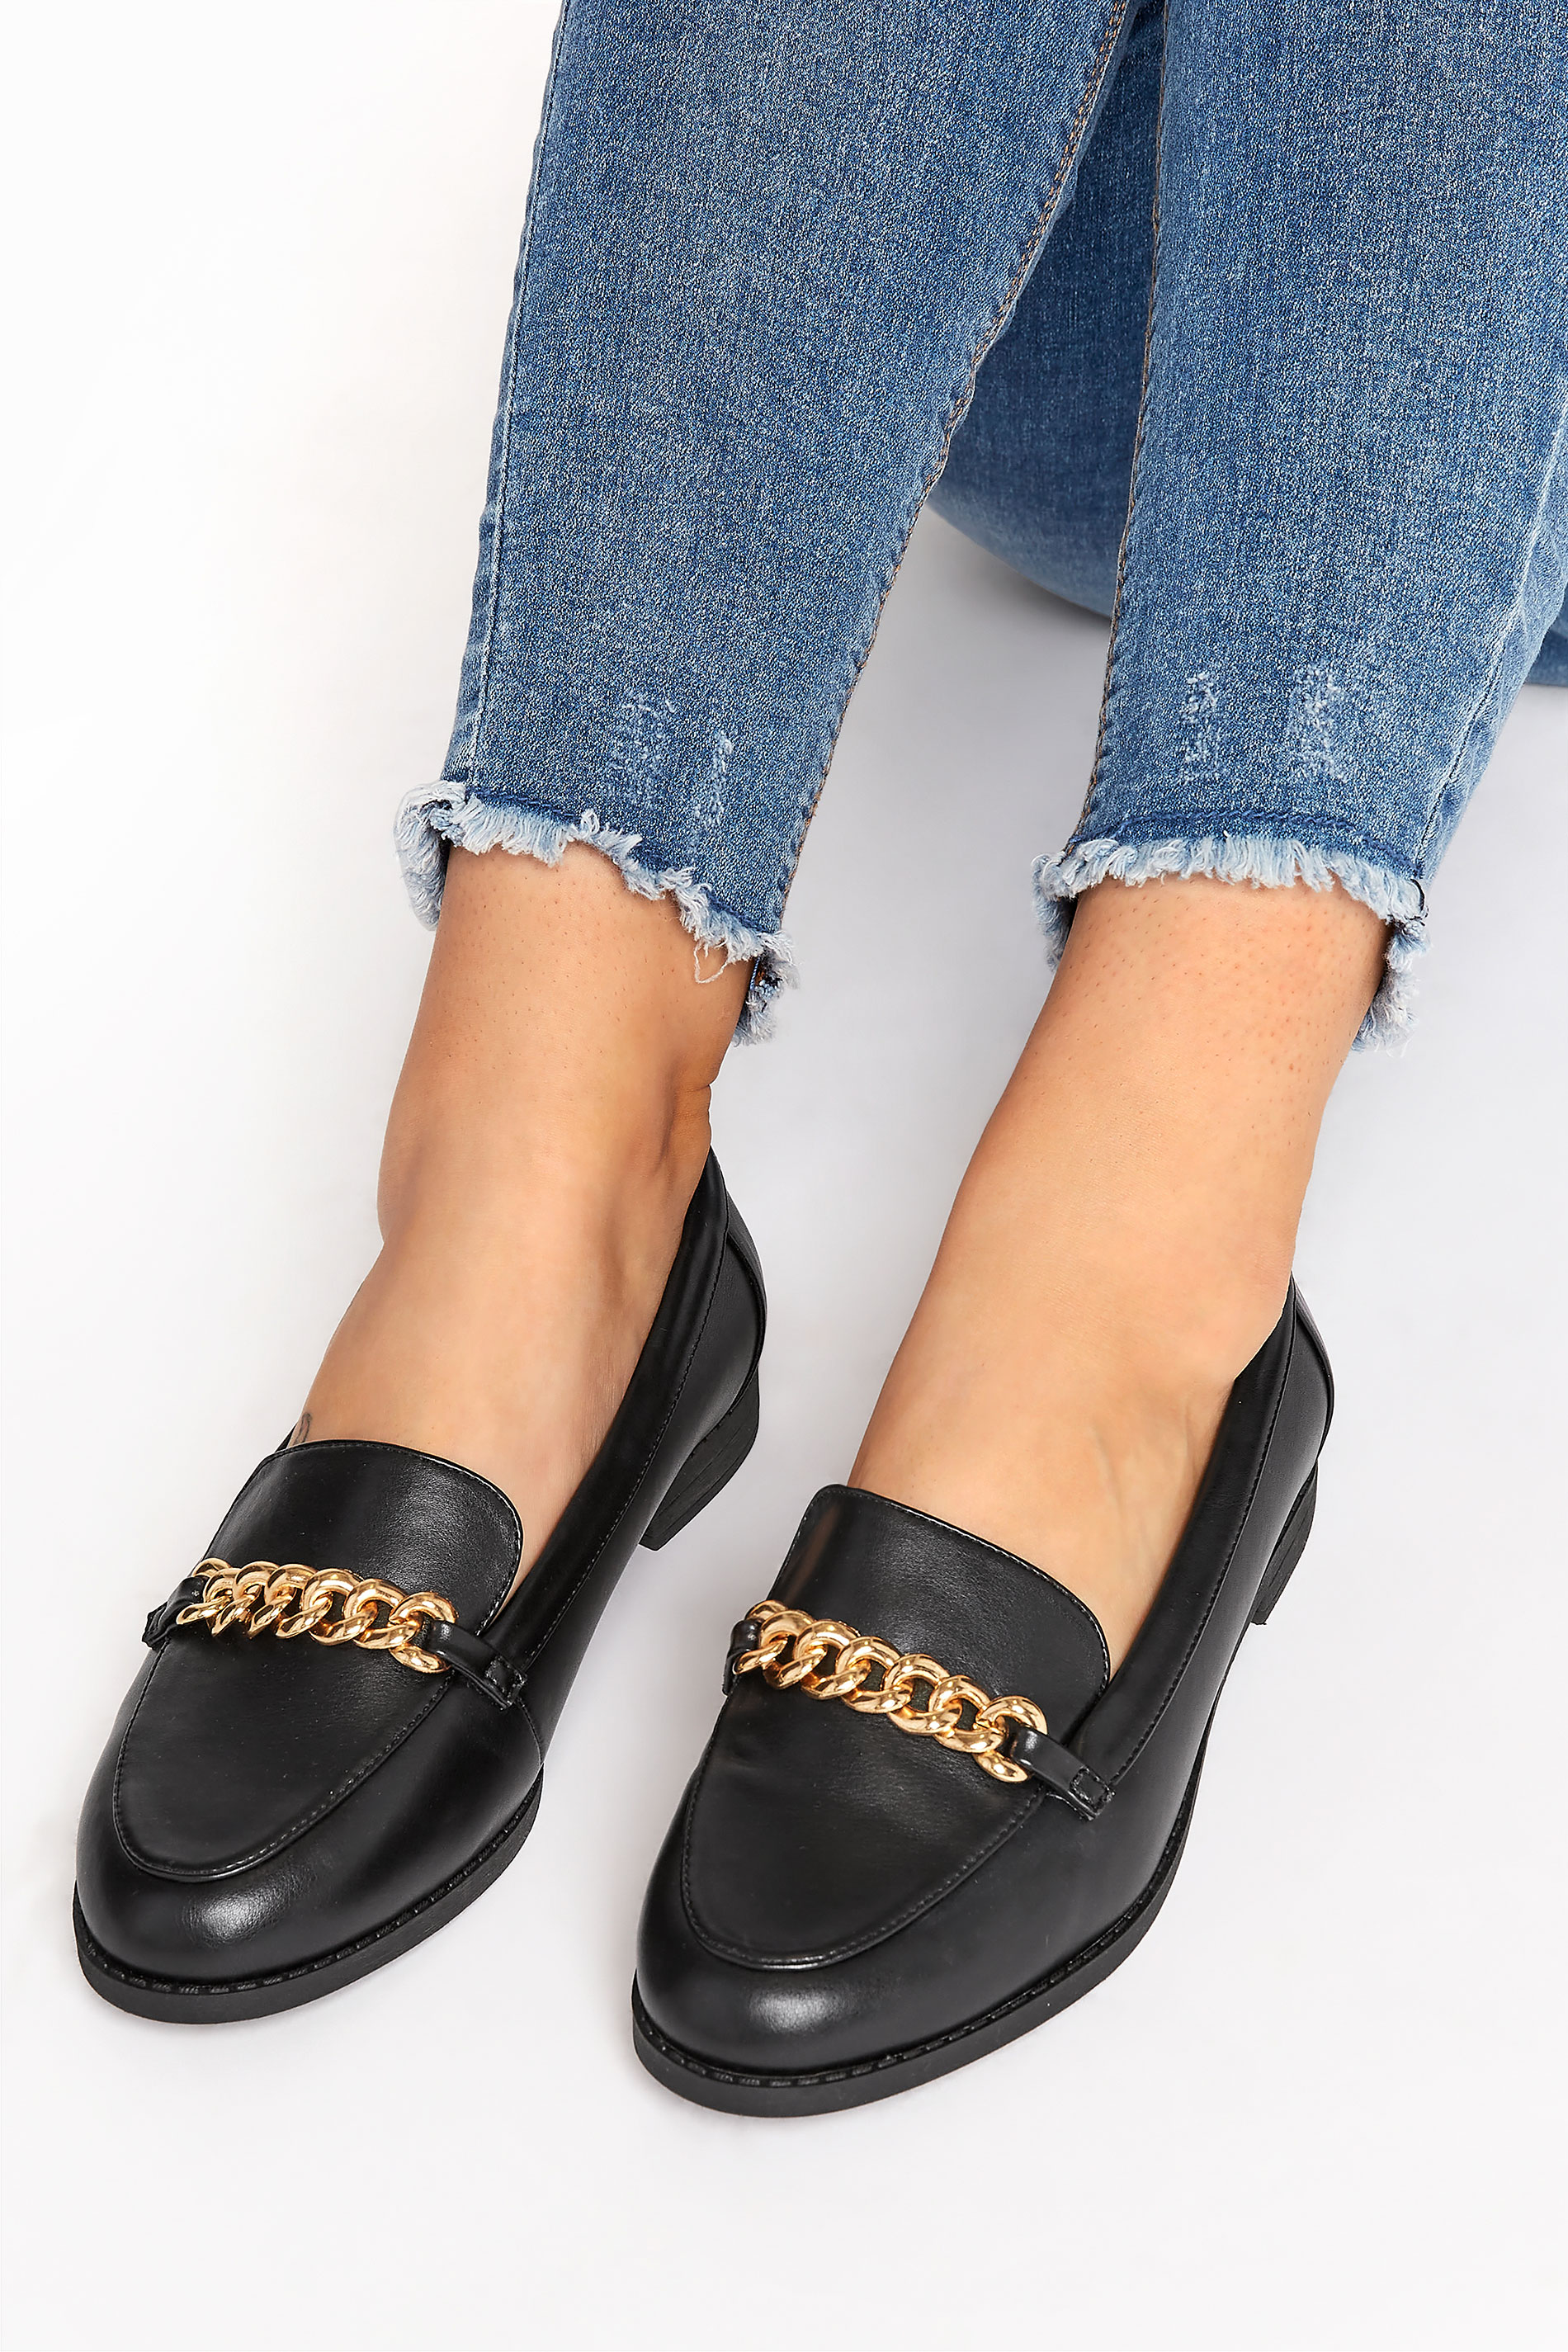 Black Chain Loafers In Extra Wide EEE Fit 1